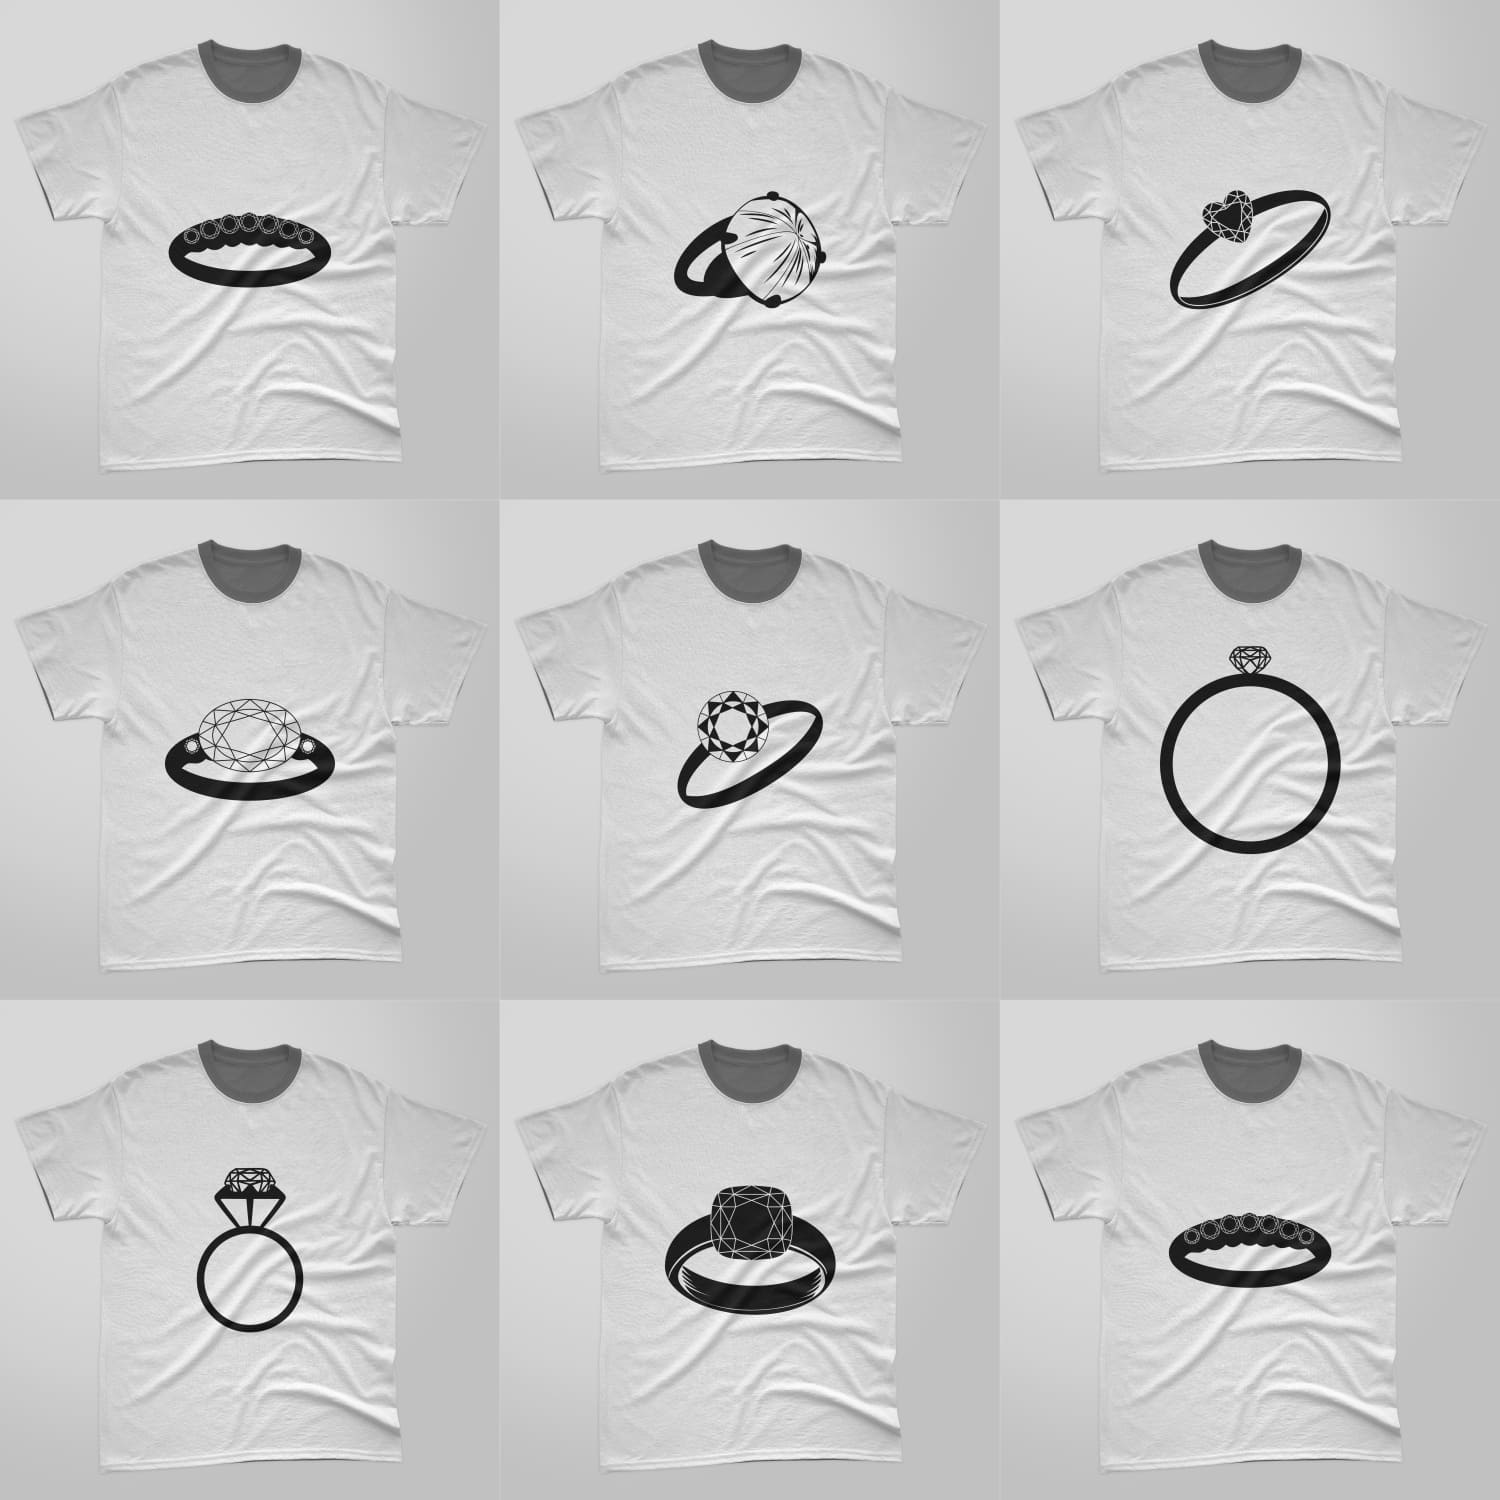 Bundle of images of t-shirts with charming prints of diamond ring silhouette.